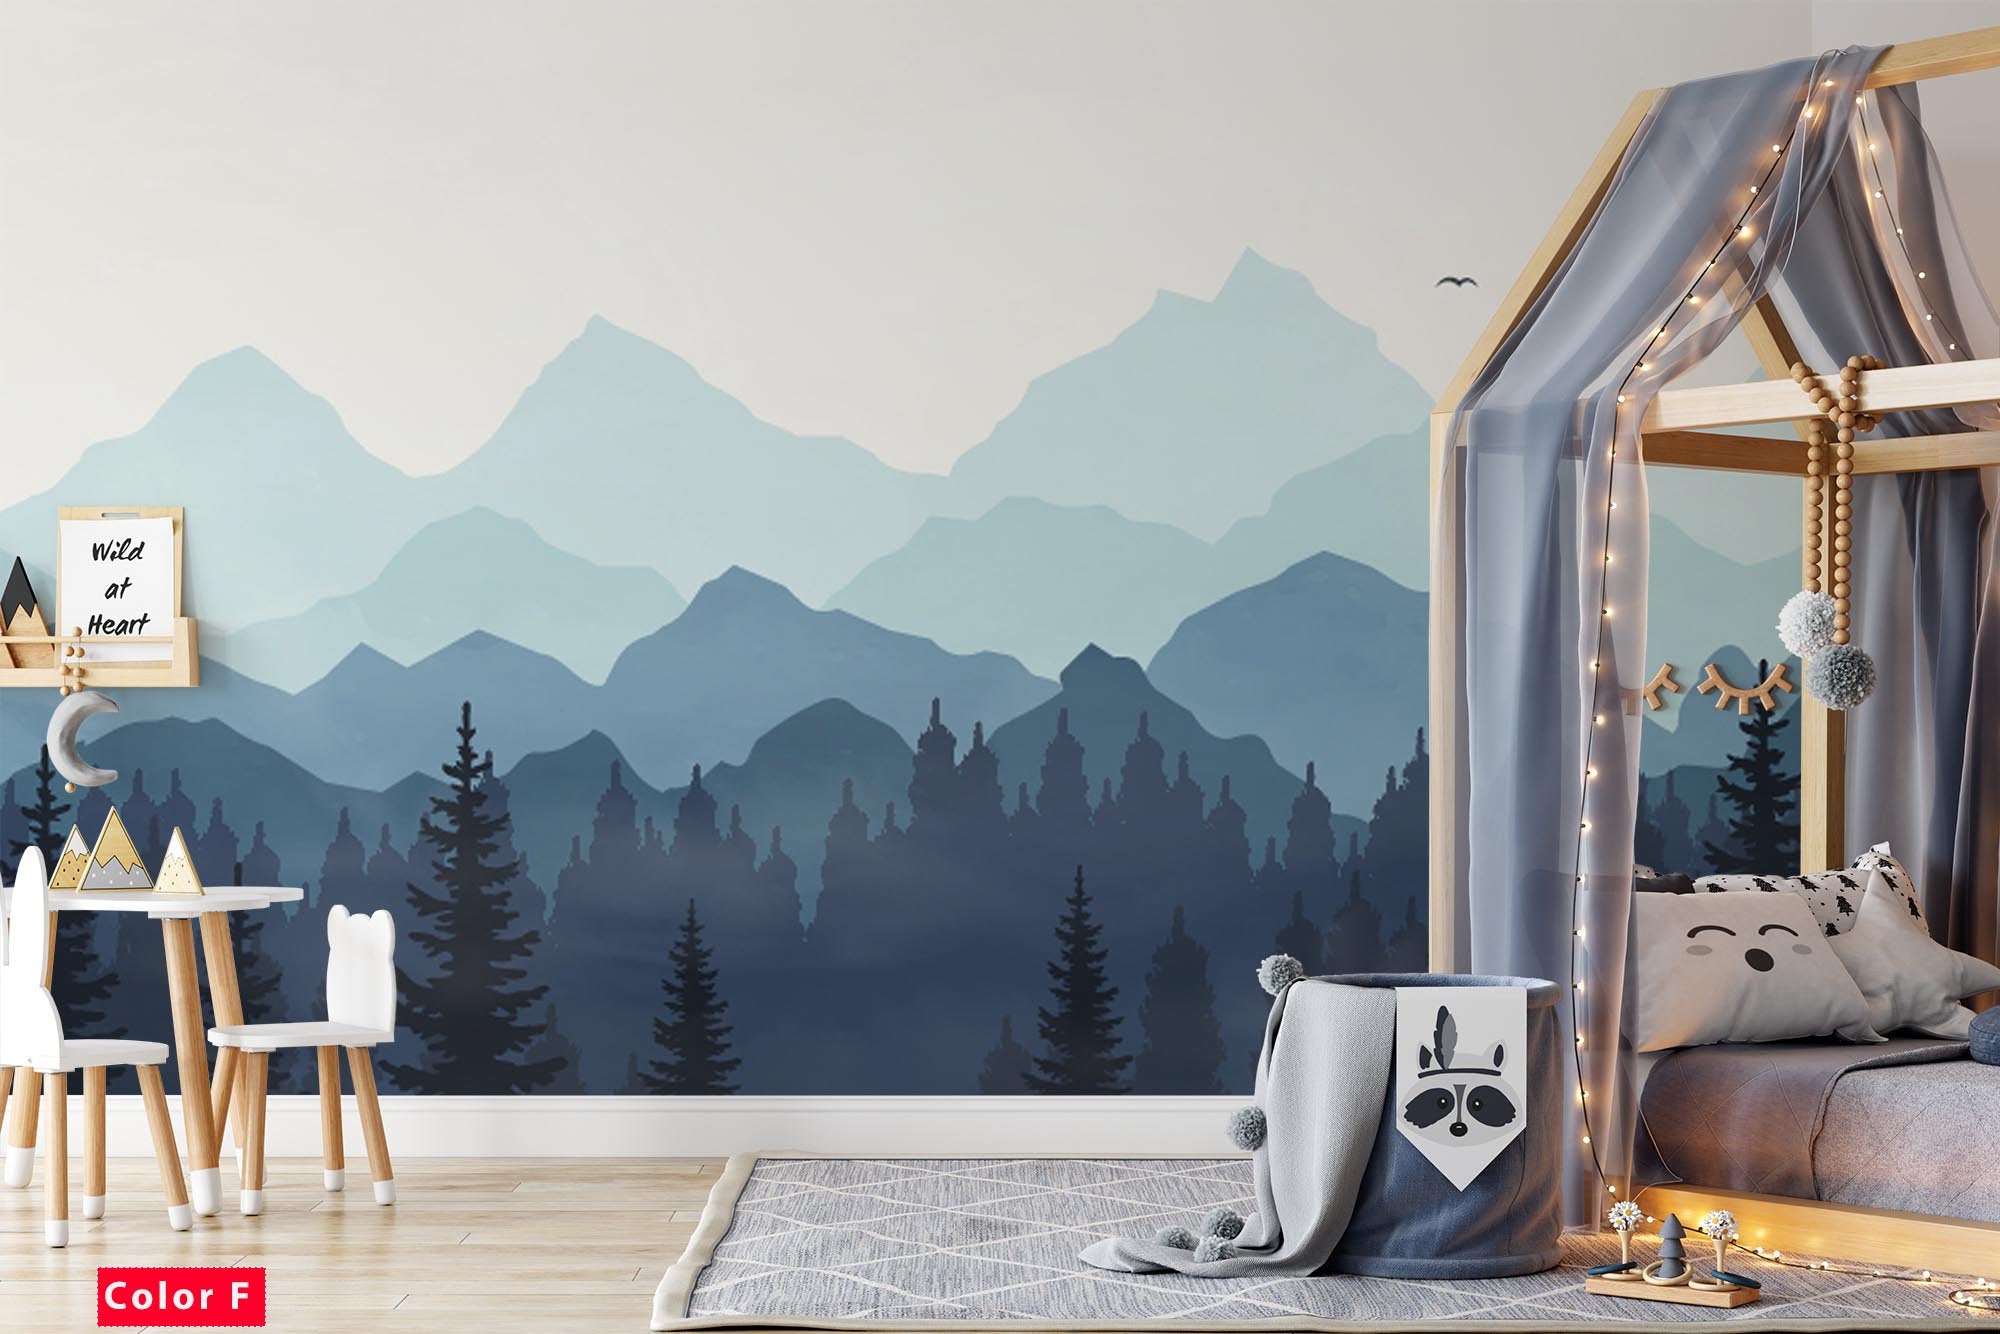 Foggy Forest Row Mountains Birds Wallpaper Self Adhesive Peel and Stick Wall Sticker Wall Decoration Minimalistic Scandinavian Removable